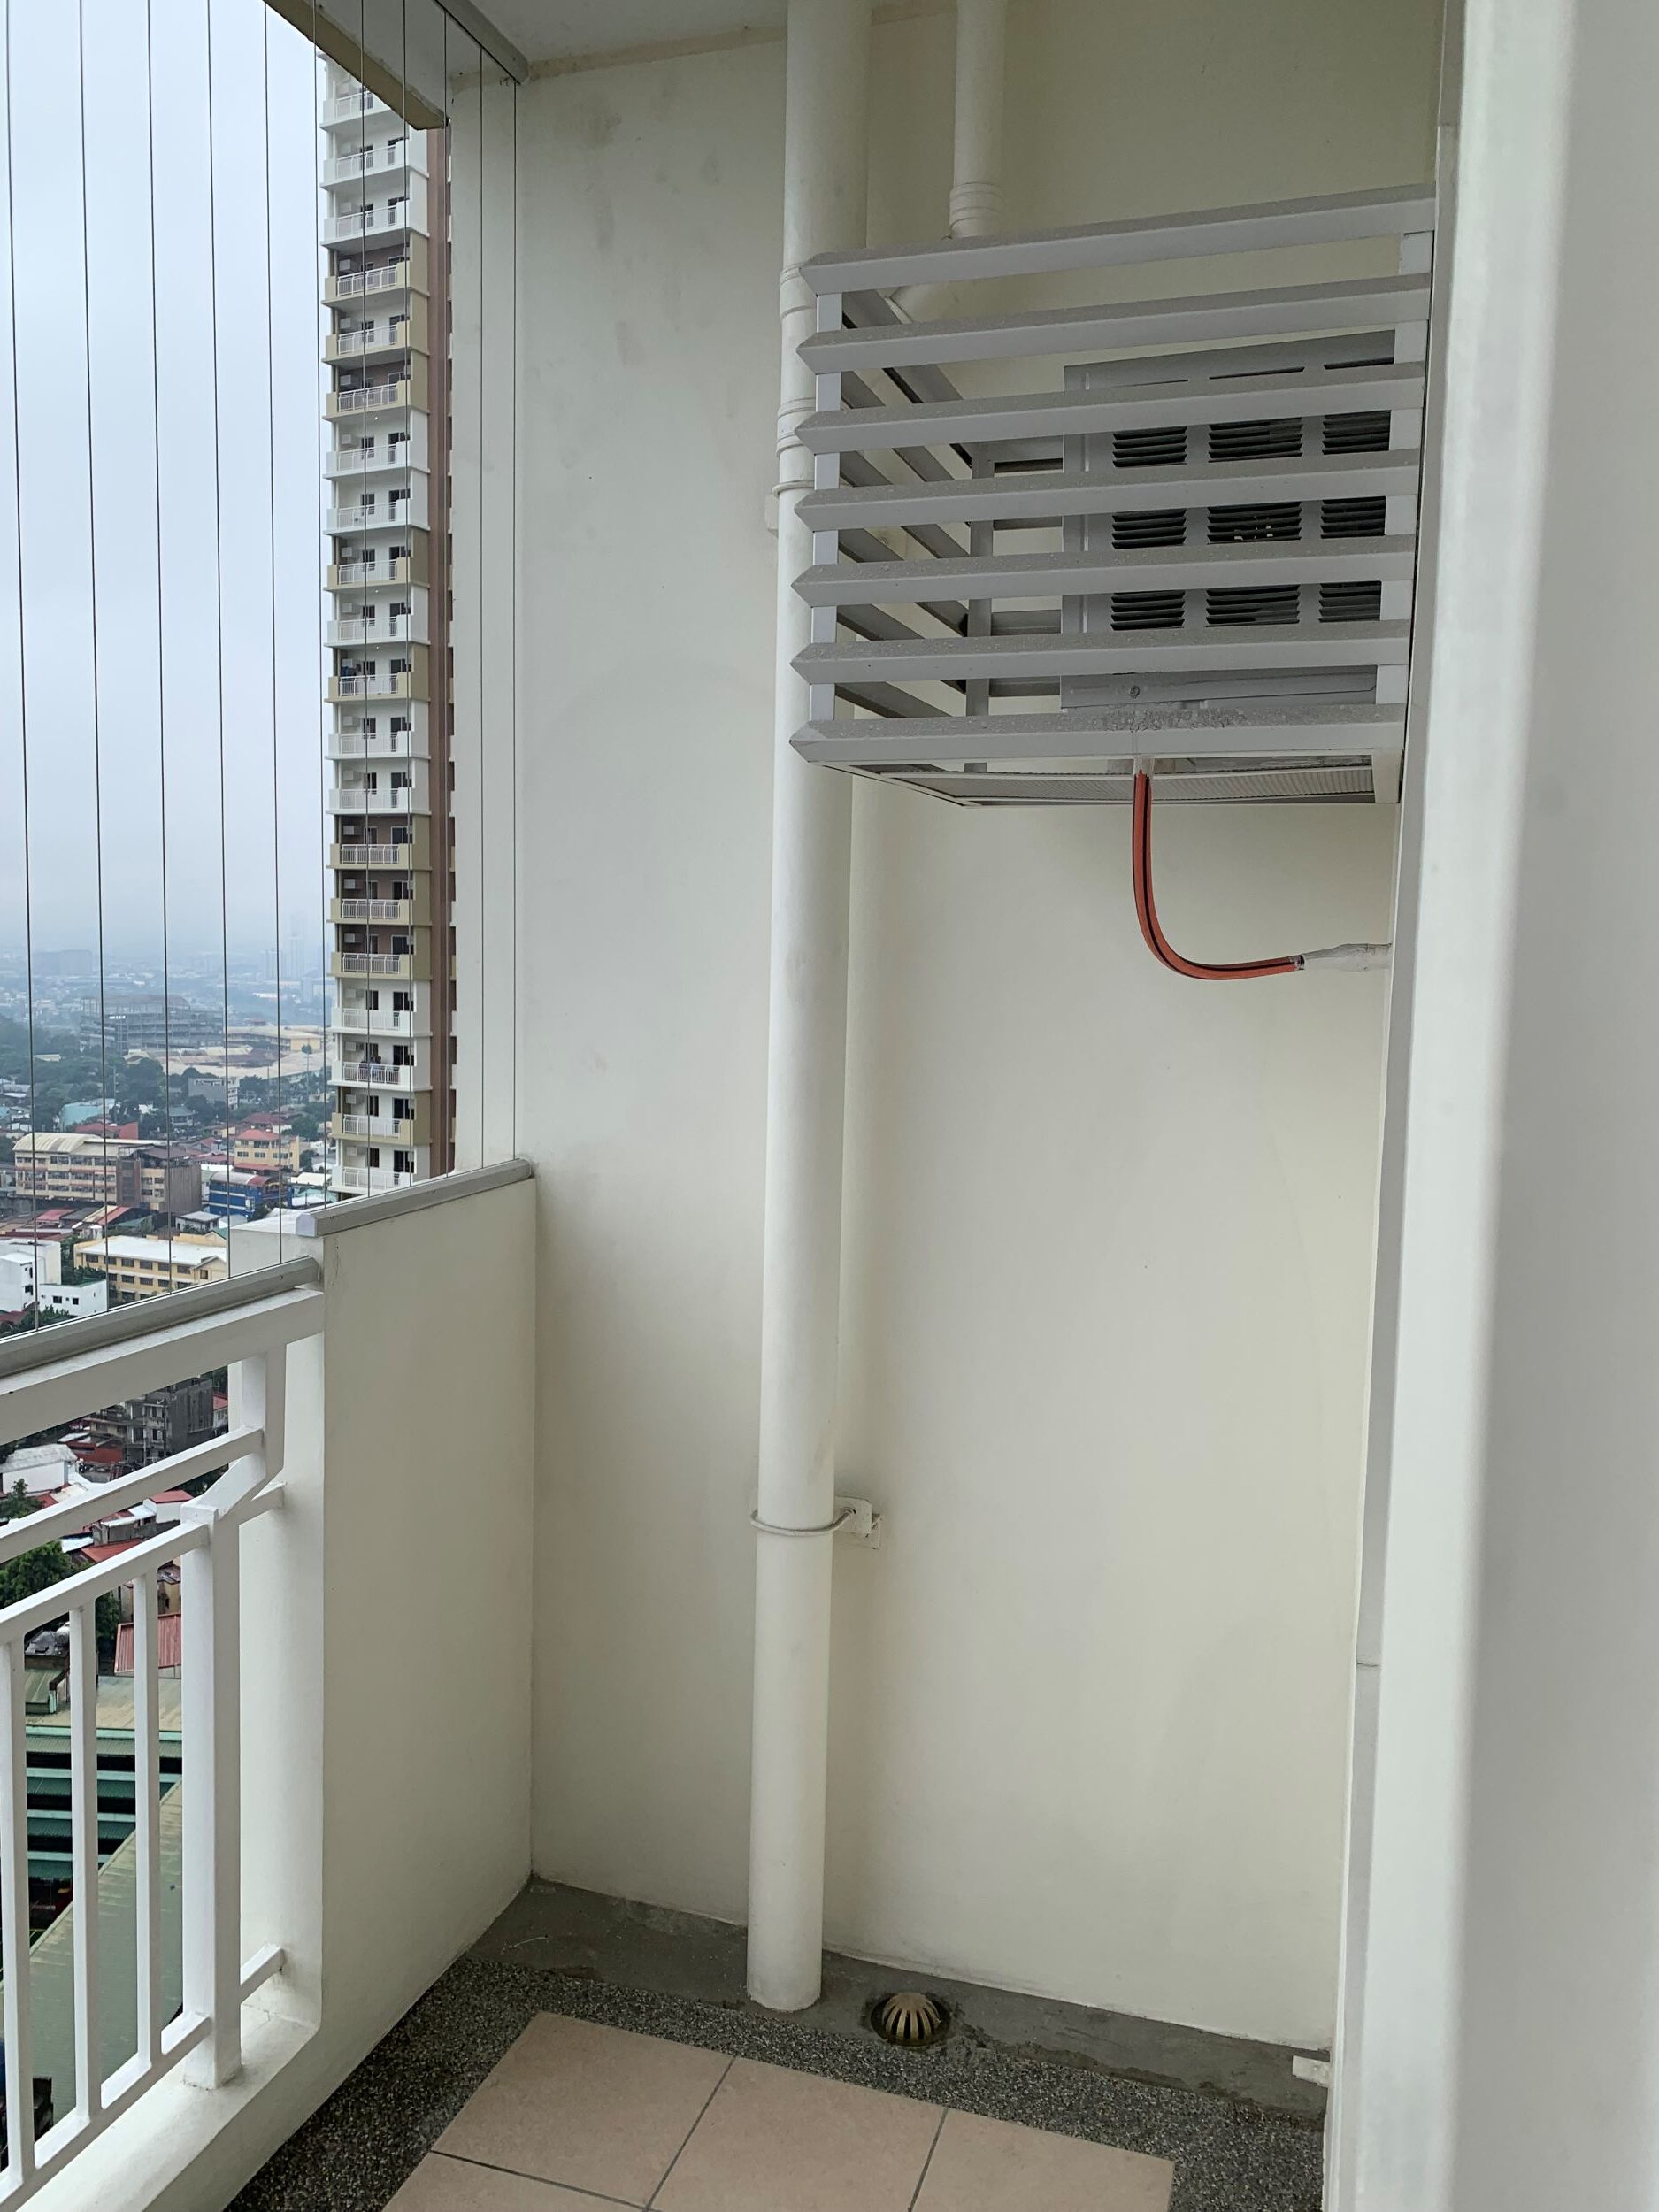 Fully Furnished 2BR Condo with Parking at Infina Towers, Quezon City